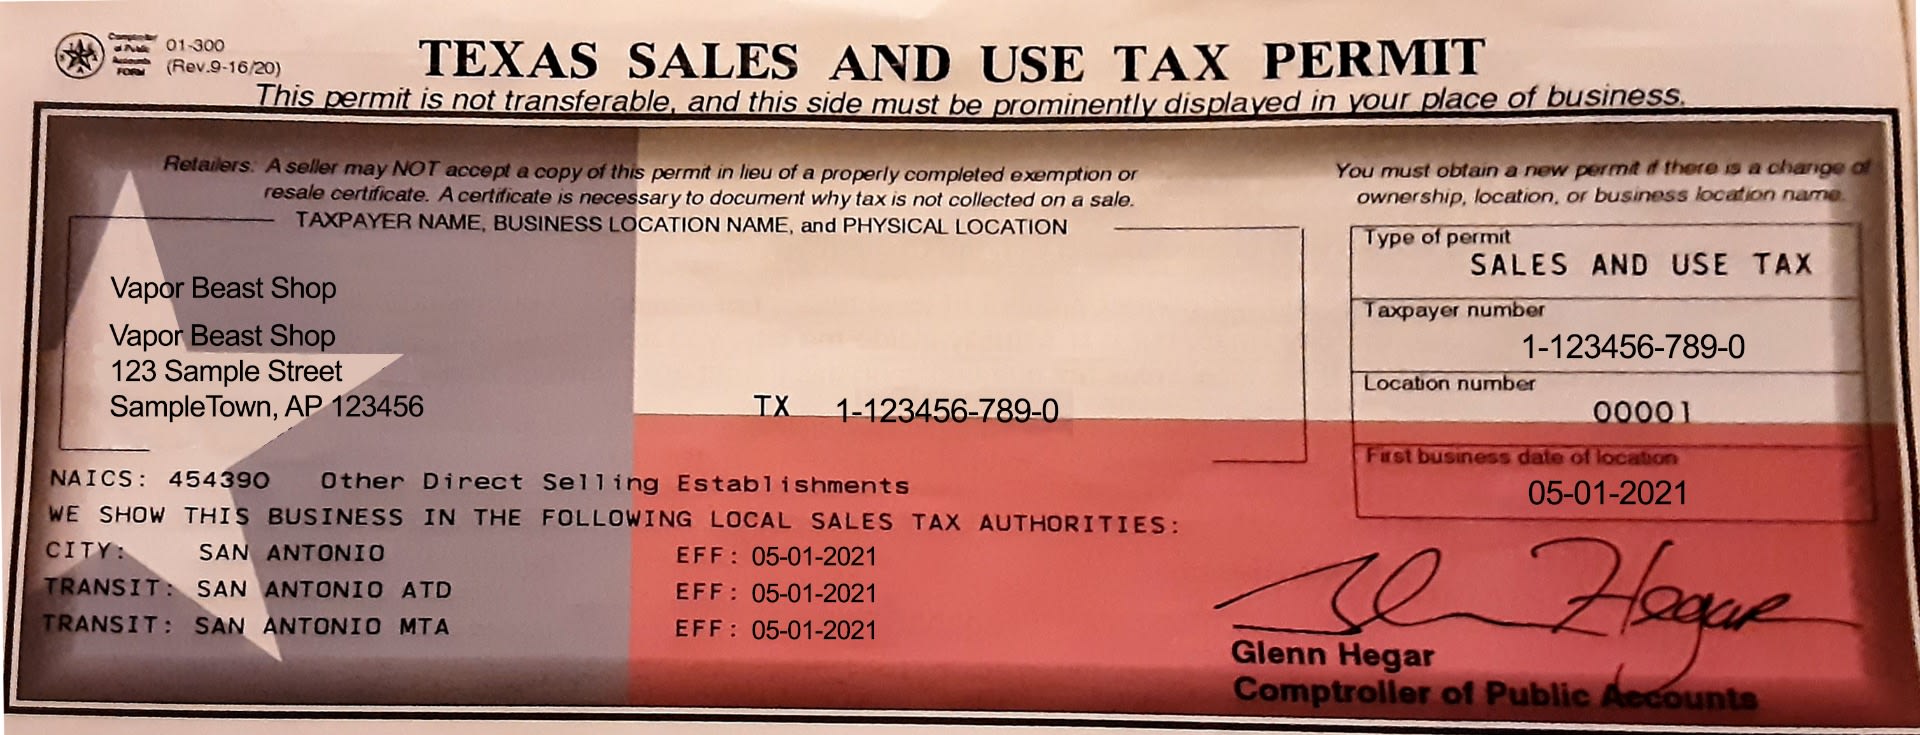 Texas Sales and Use Permit